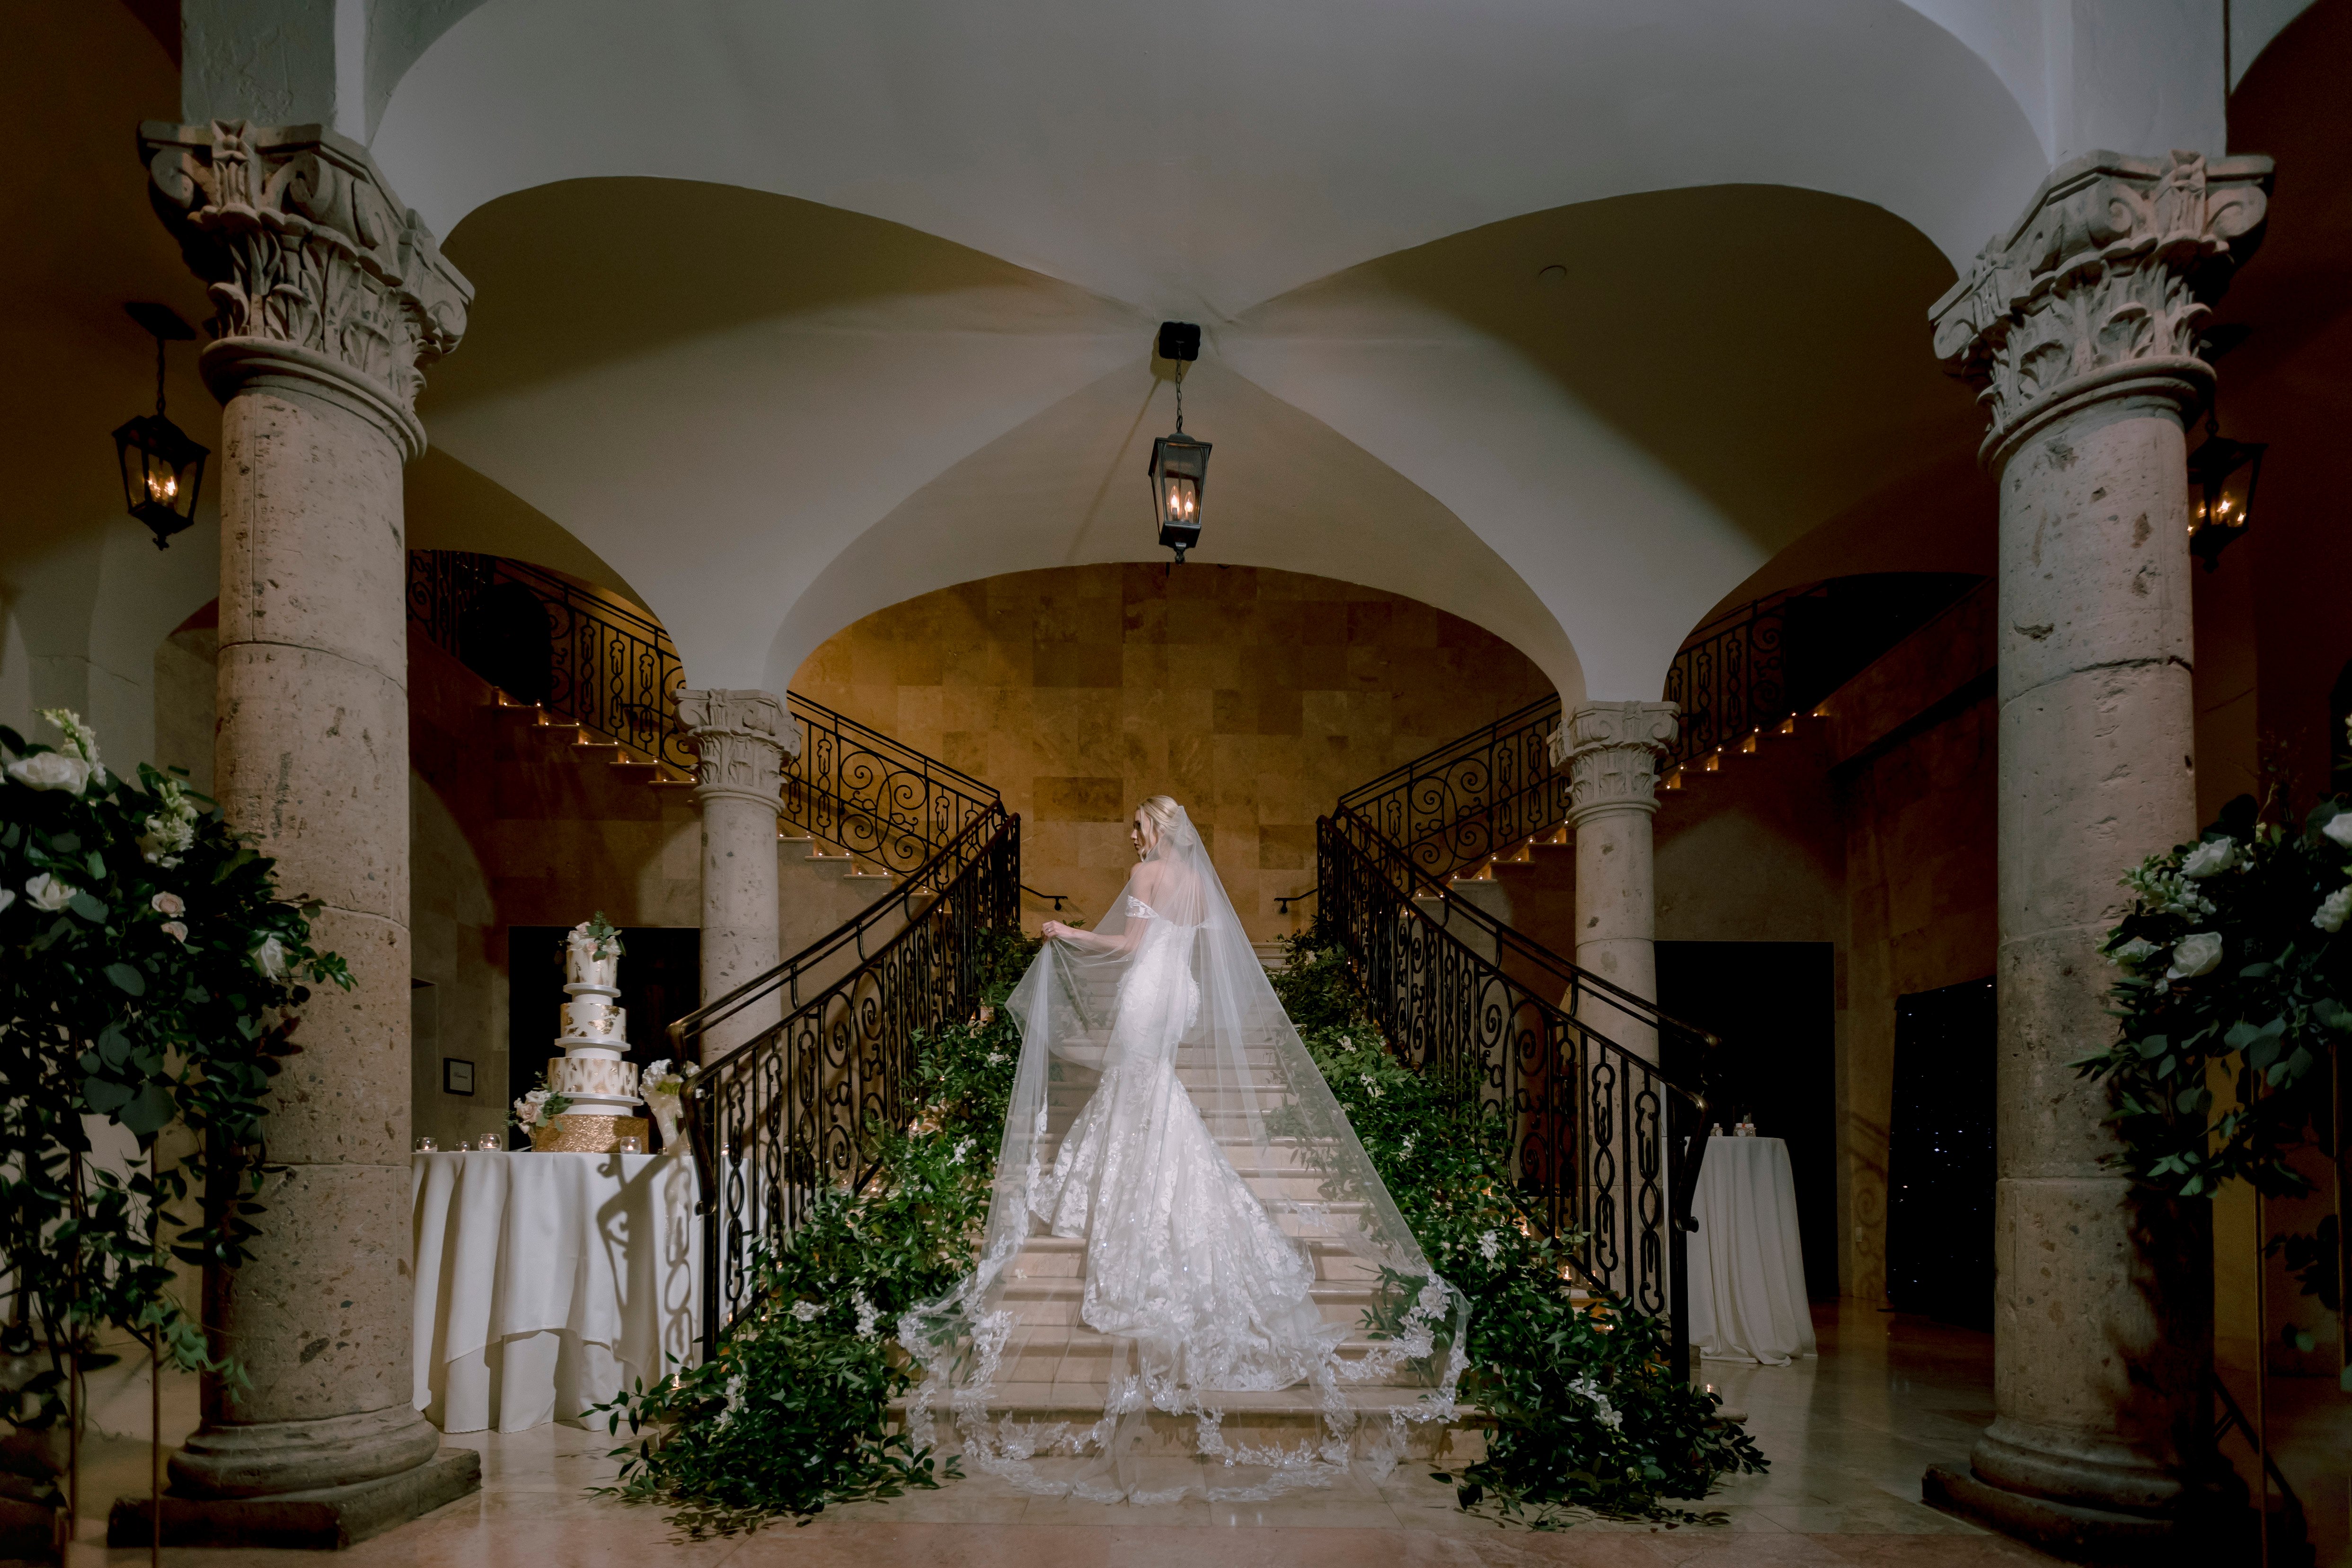 The bride poses in the middle of the grand staircase with her veil trailing behind her before her greenery-filled wedding.